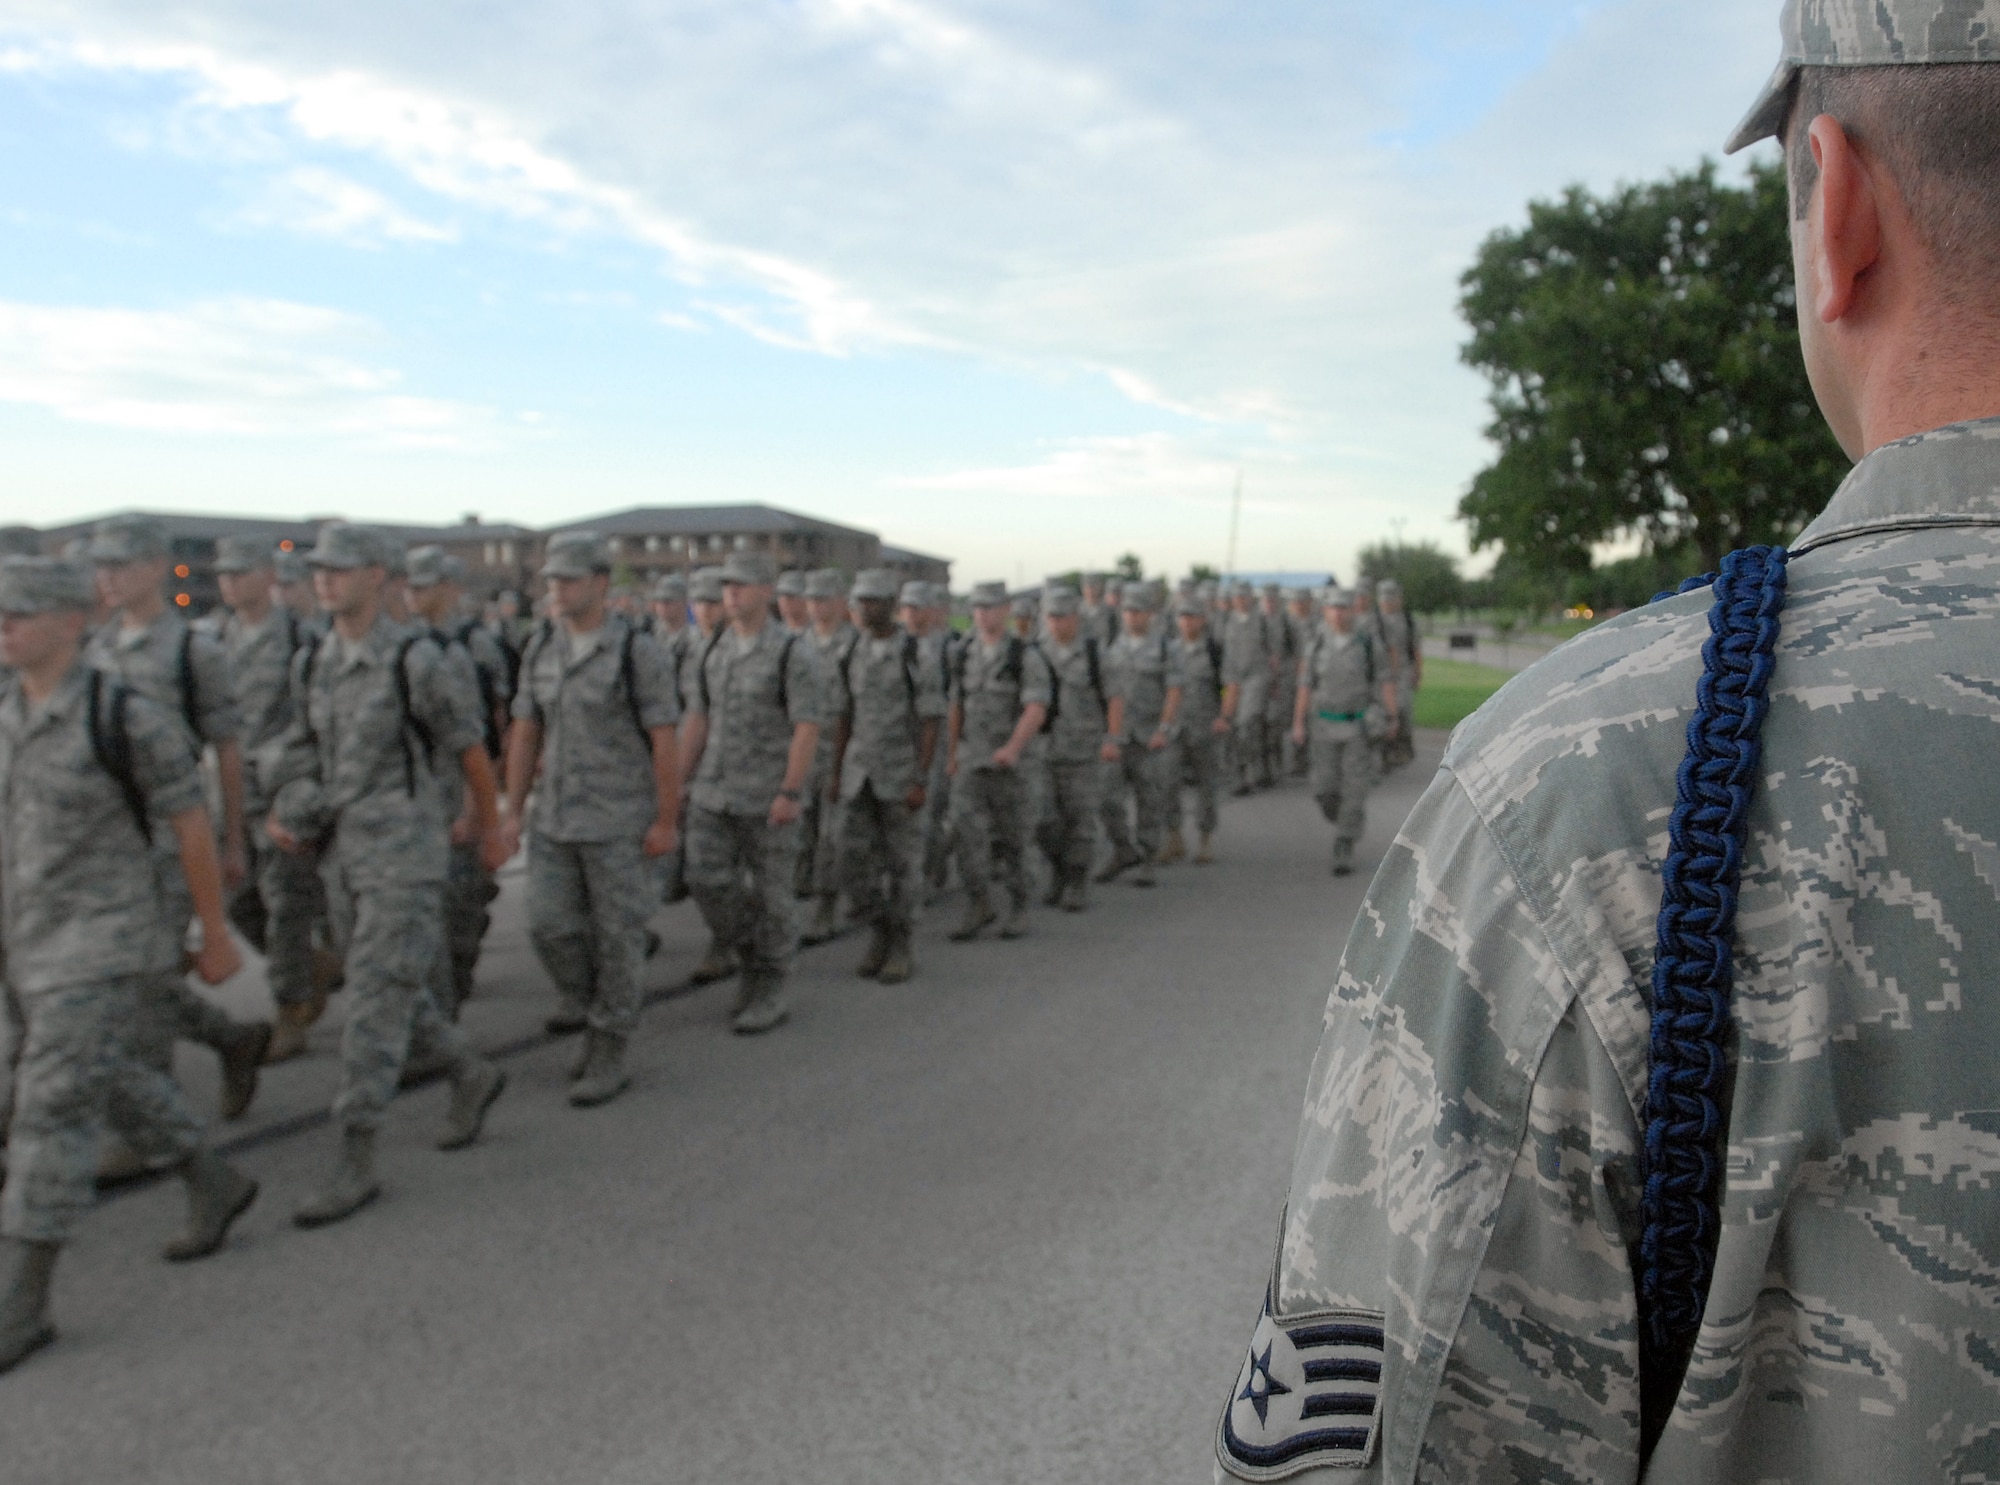 A Military Training Leader, from the 316th Training Squadron Goodfellow AFB, TX, keeps an eye on a formation of Airman as they march to class June 6. MTL’s ensure that the lessons learned in Basic Military Training are reinforce as each new Airman progresses through their technical training and leave for their first assignment. (U.S. Air Force photo/Master Sgt. Randy Mallard)